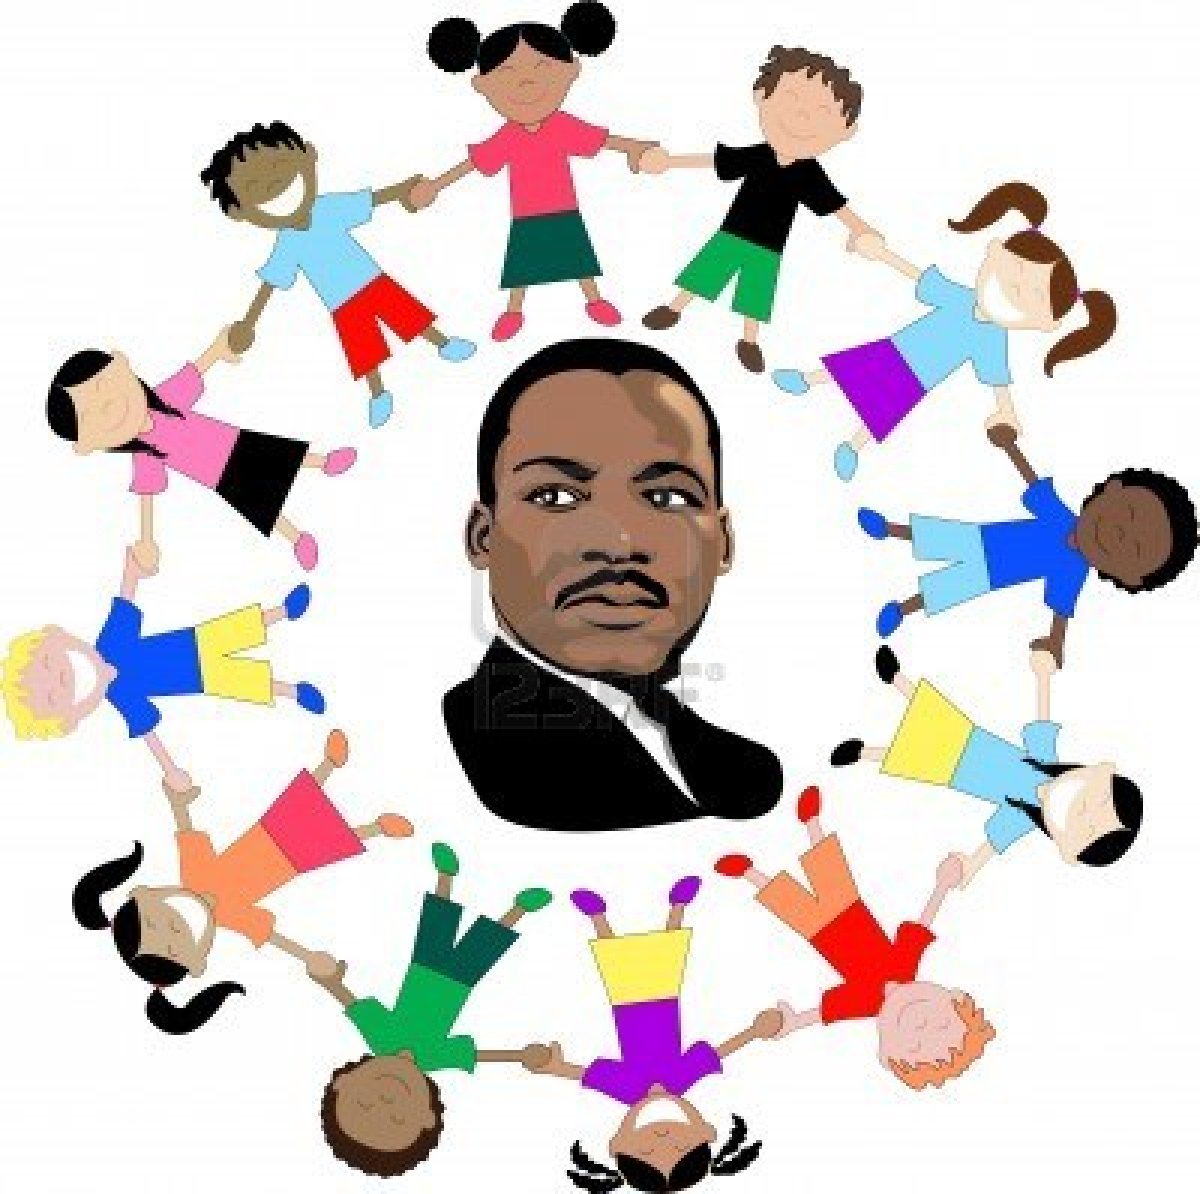 Martin luther king jr clip art free